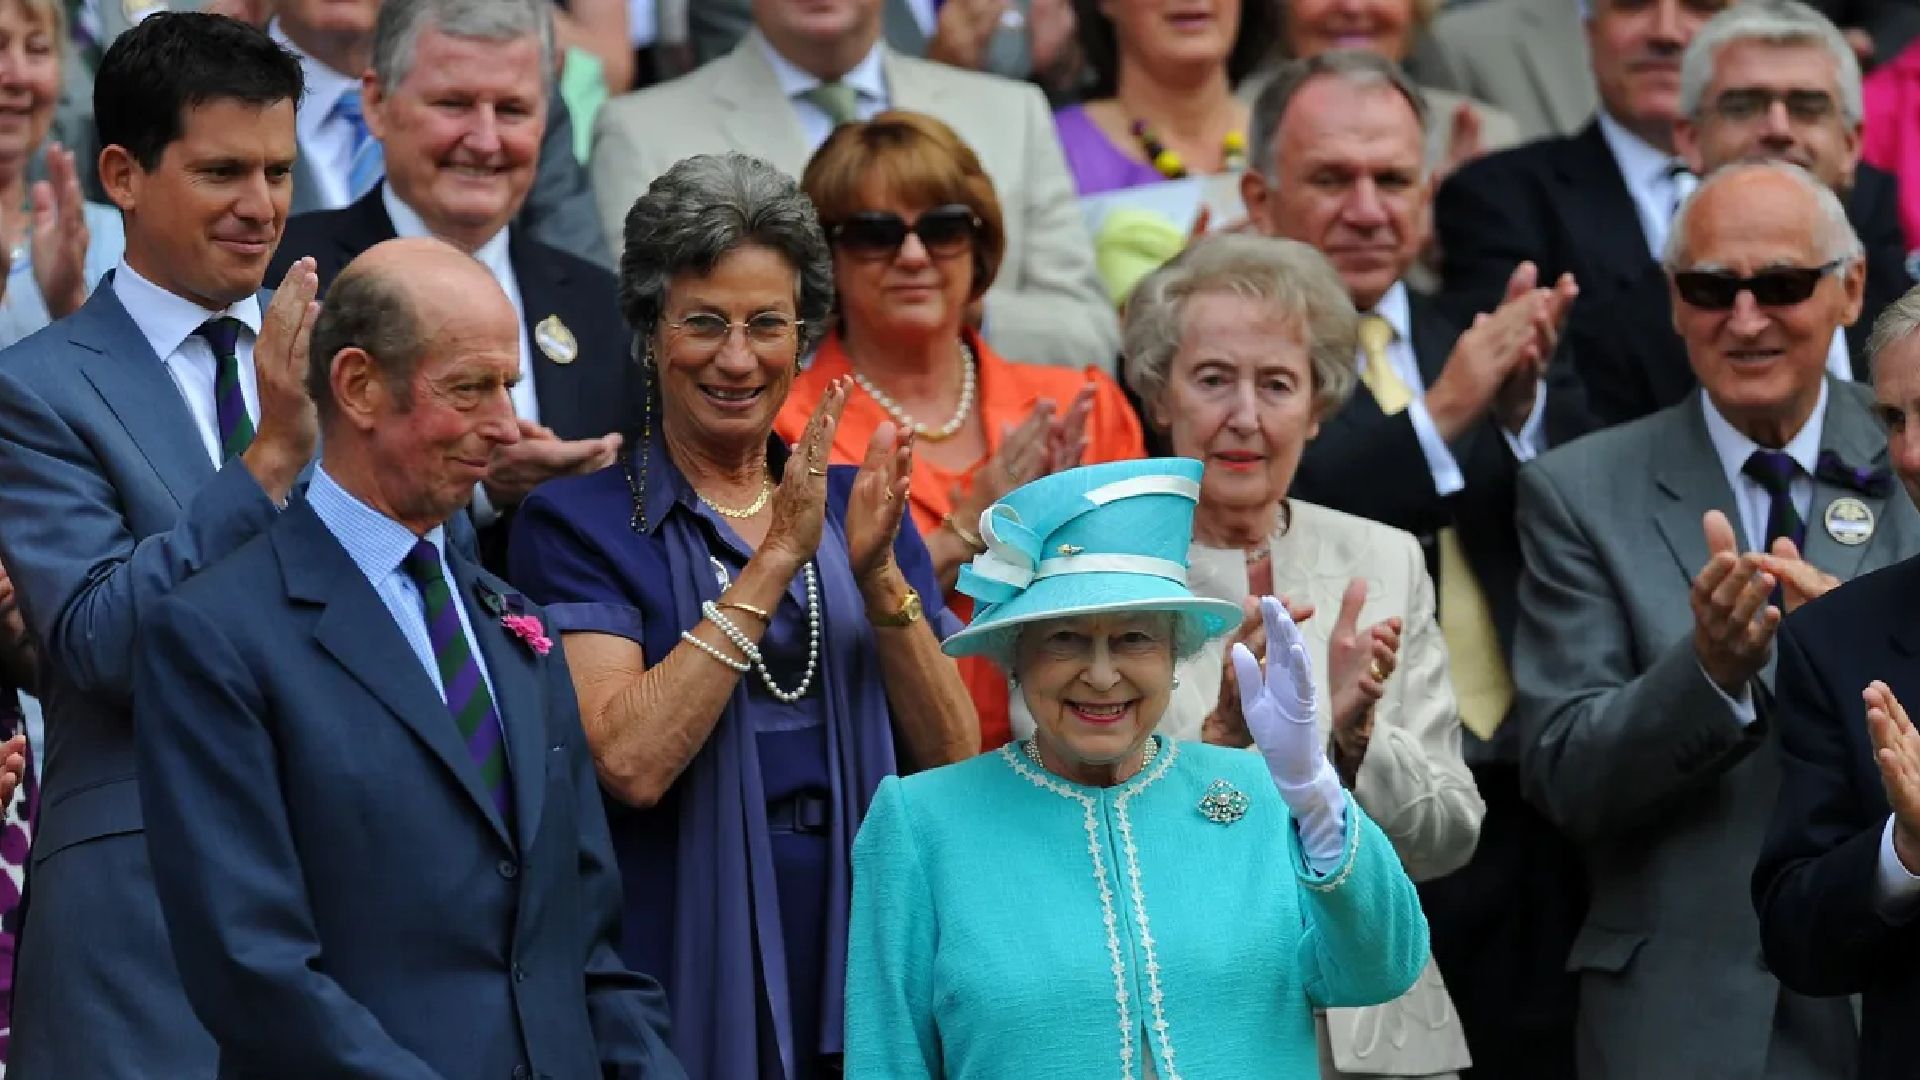 <p>                     The final time Her Majesty ever graced the grass courts was in June 2010 and according to reports she attended the iconic championships just four times during her extraordinary reign, despite being Patron of the All England Tennis and Croquet Club for many years. She passed this patronage over to the Princess of Wales in 2017 and Queen Elizabeth’s last Wimbledon appearance saw a rare but traditional bow to the Royal Box from the Center Court players.                   </p>